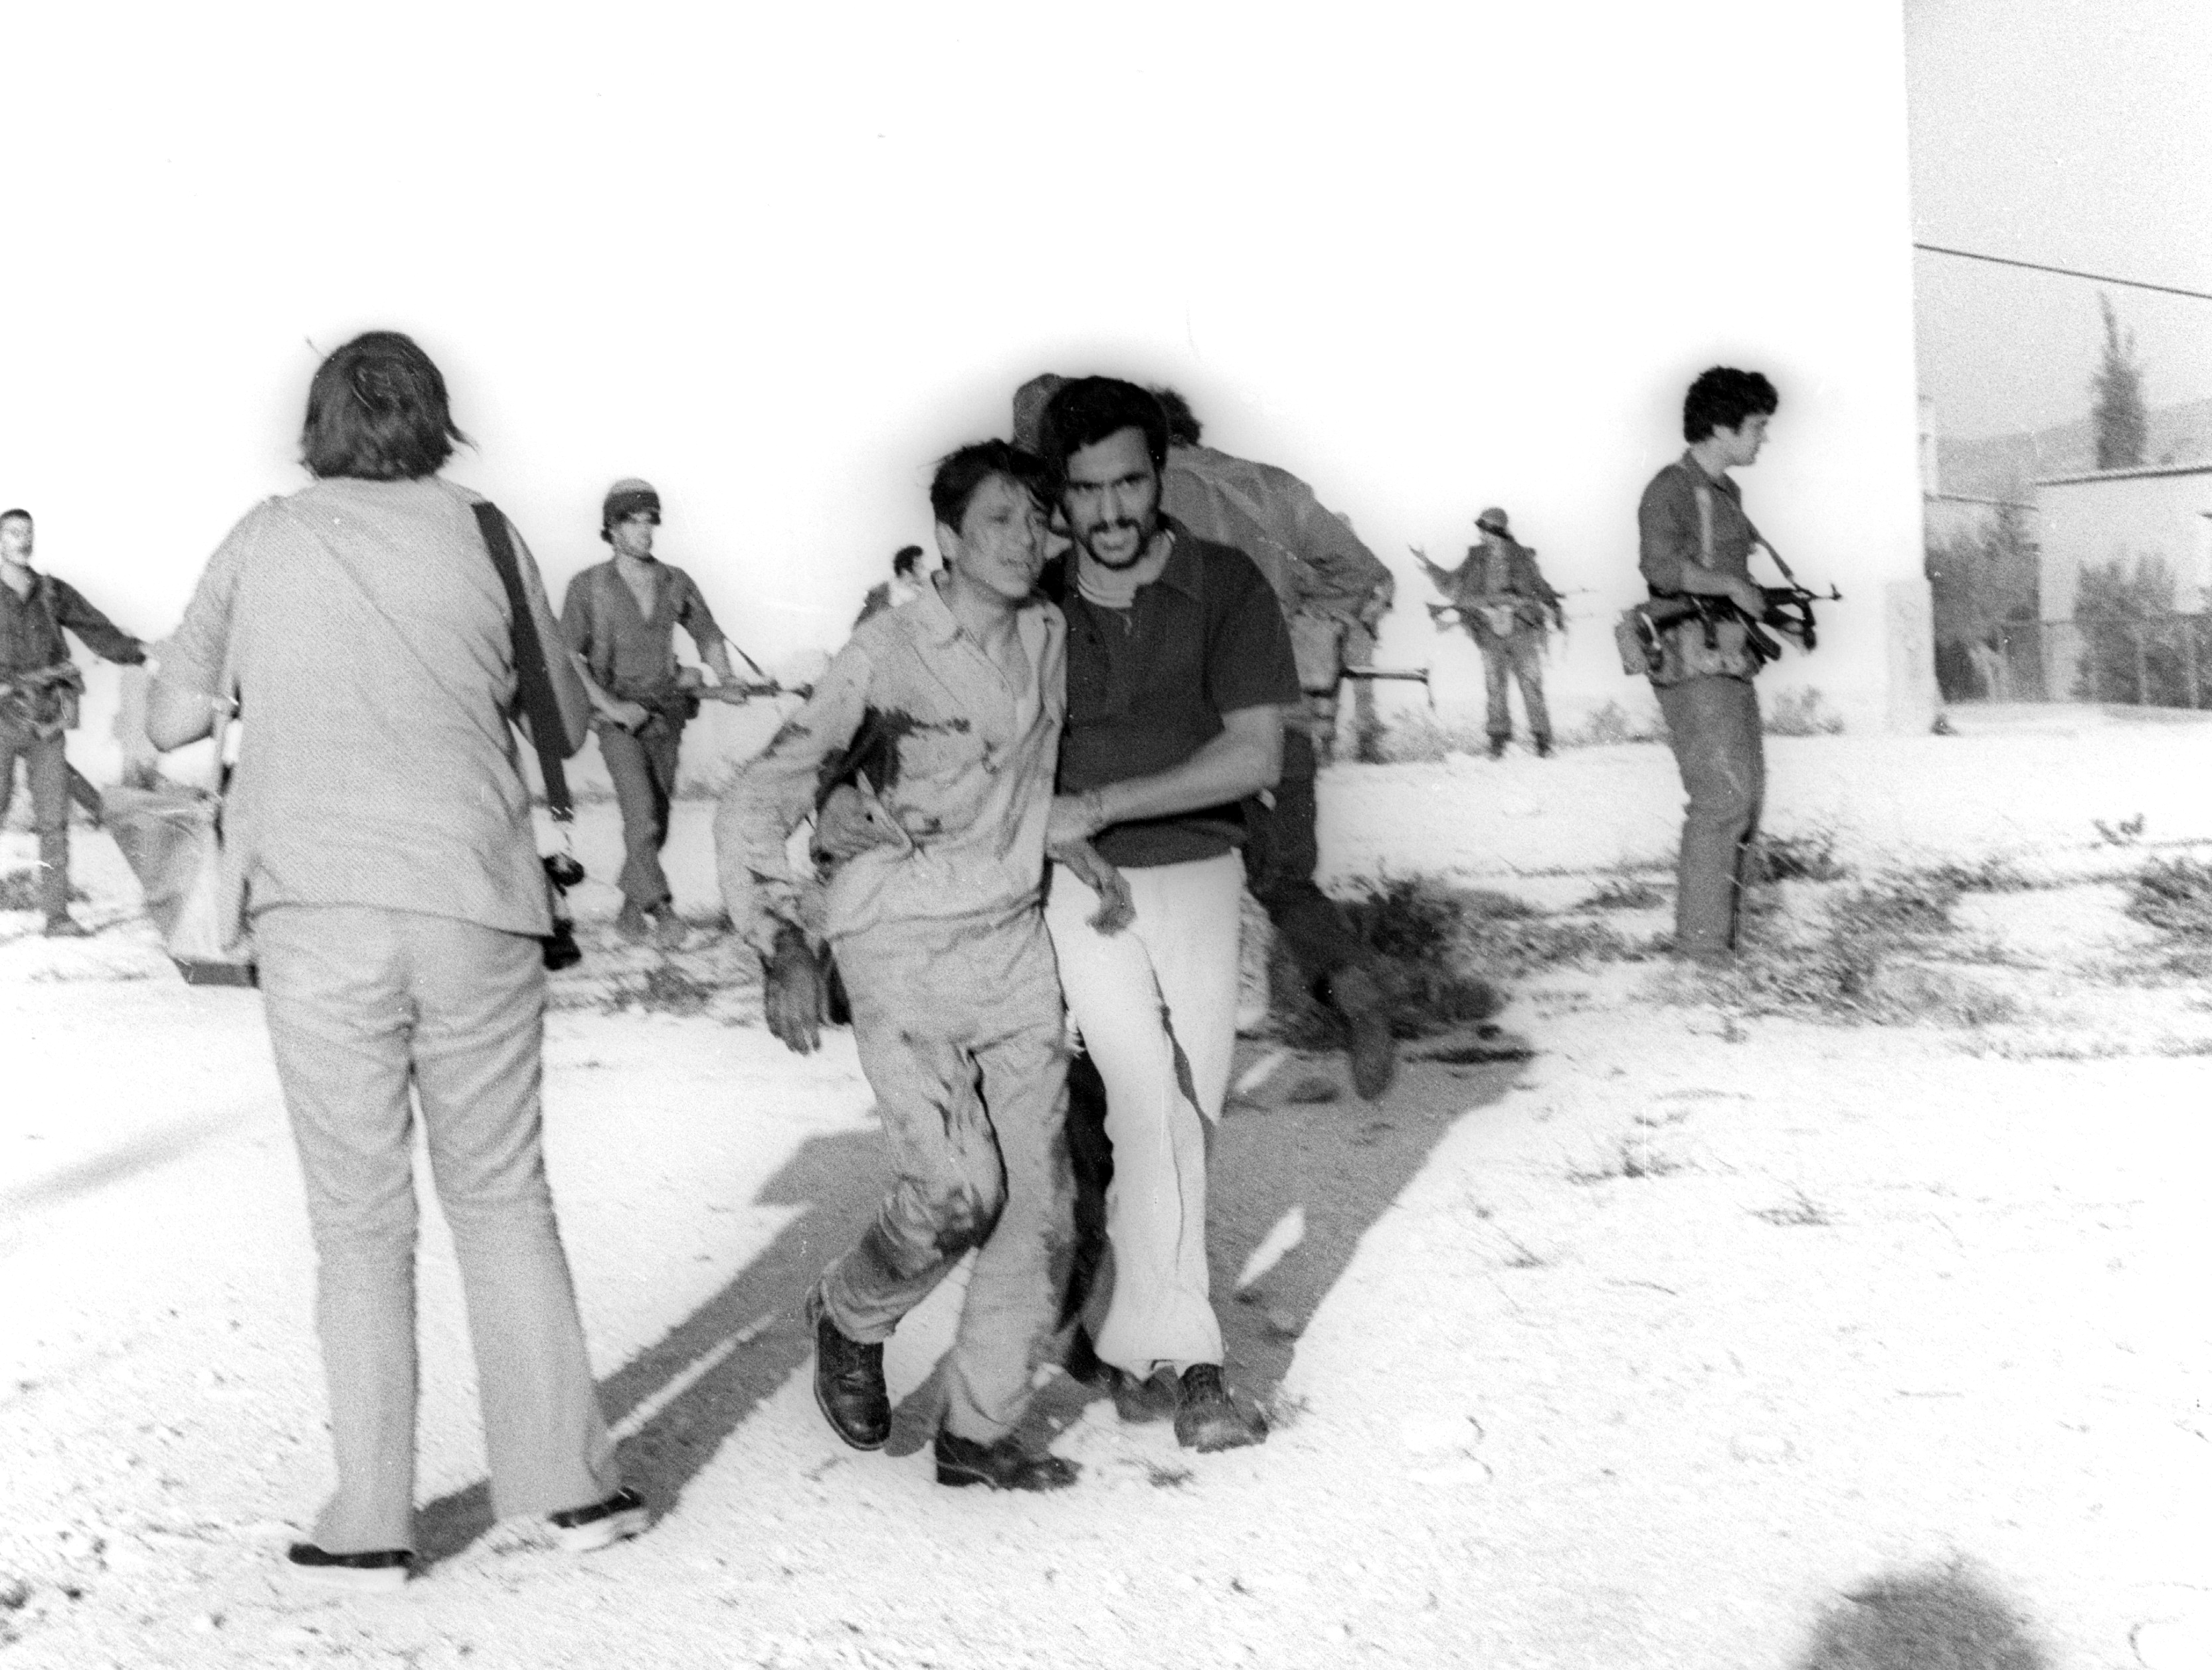 An Arab terrorist group attacked a school at Maalot killing several children and wounded thenth of them. IDF attacked the group killing the terrorists. Photo shows: Soldier rescue the wounded children from the school 1974/05/15 Copyright © IPPA 09239-004-02 Photo by IPPA Staff